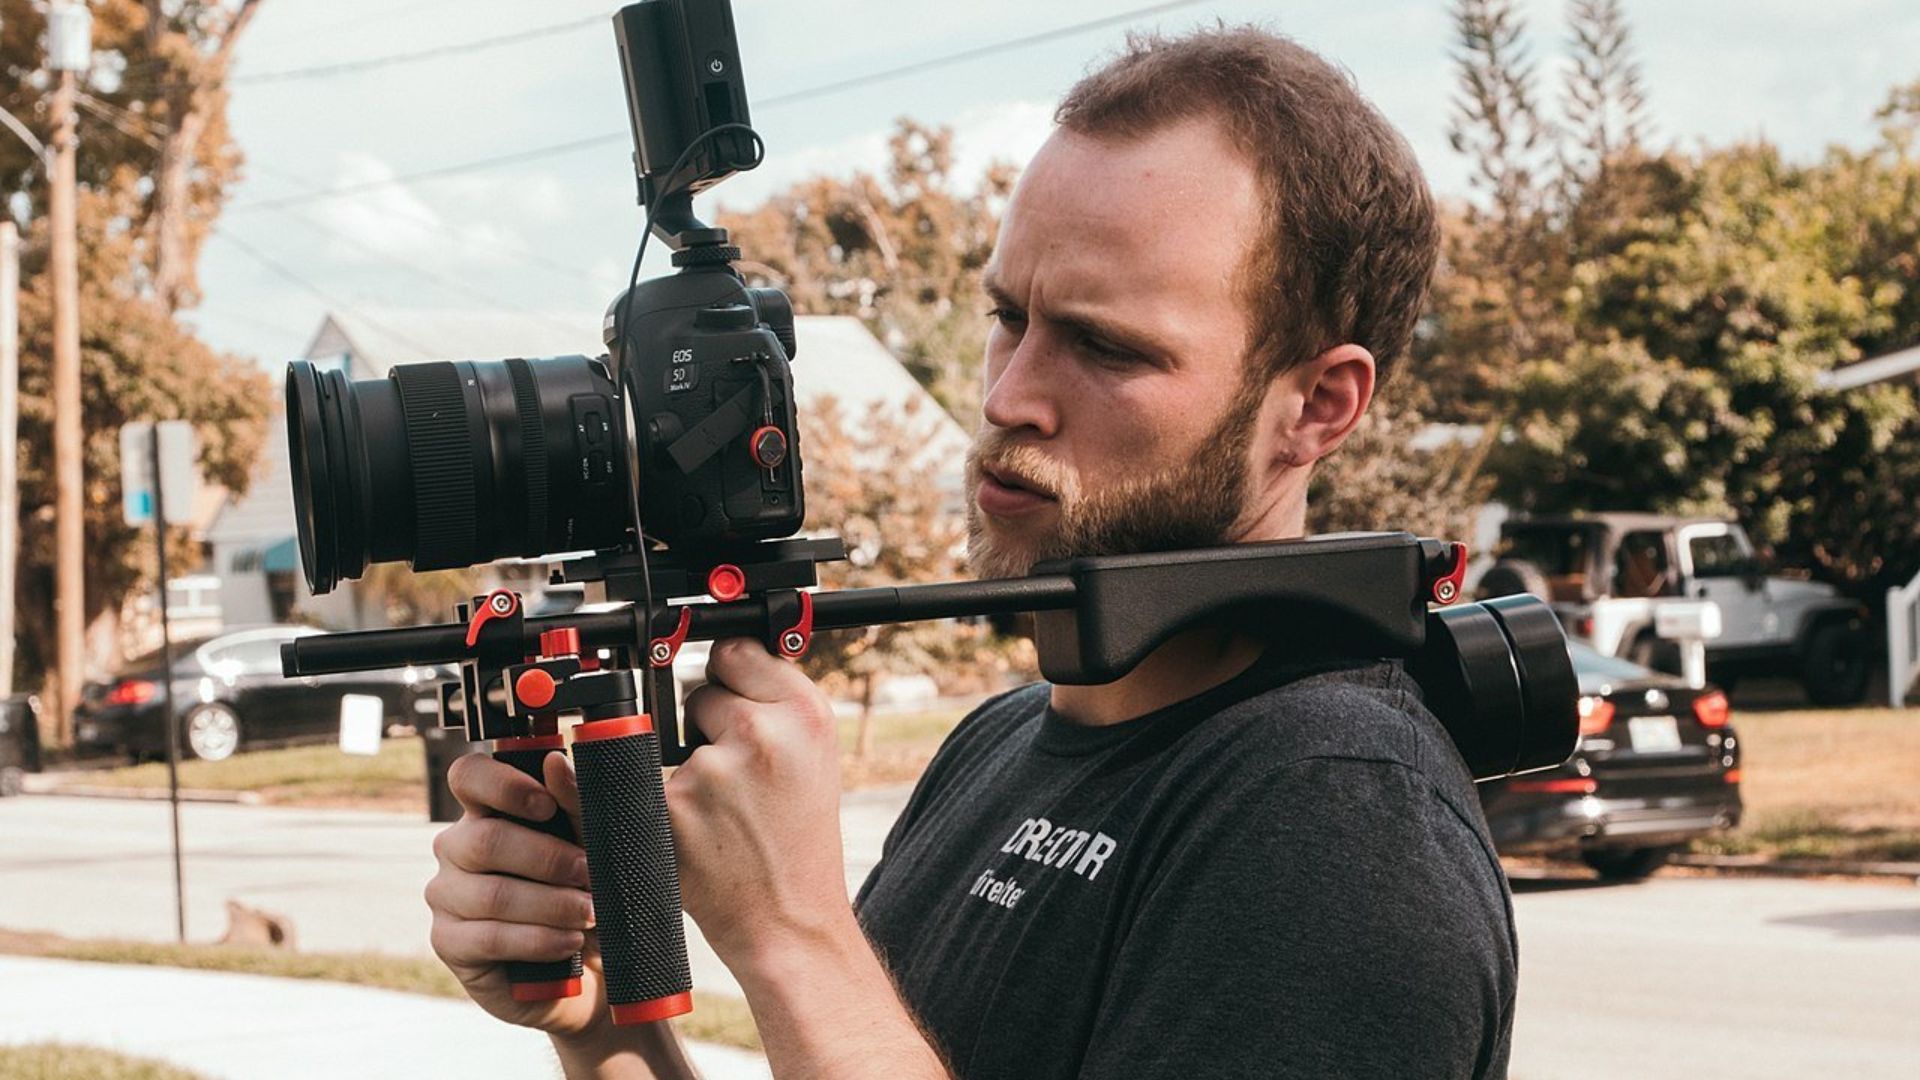 Select the Perfect Videographer for Your Project